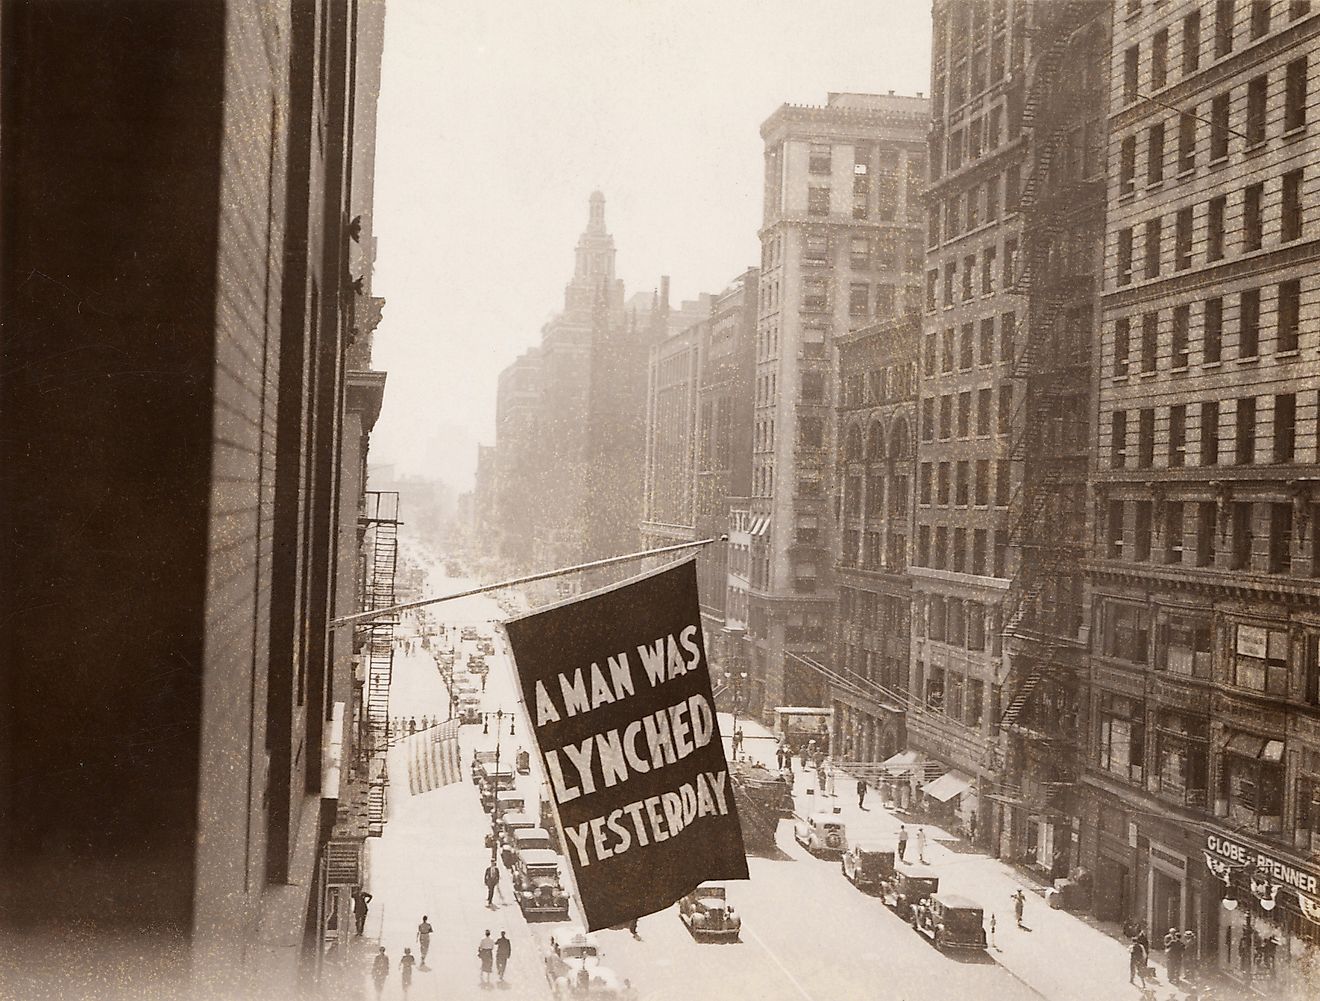 'A MAN WAS LYNCHED YESTERDAY,' is flown from the window of the NAACP headquarters on 69 Fifth Ave., New York City in 1936.Image credit: Everett Collection / Shutterstock.com